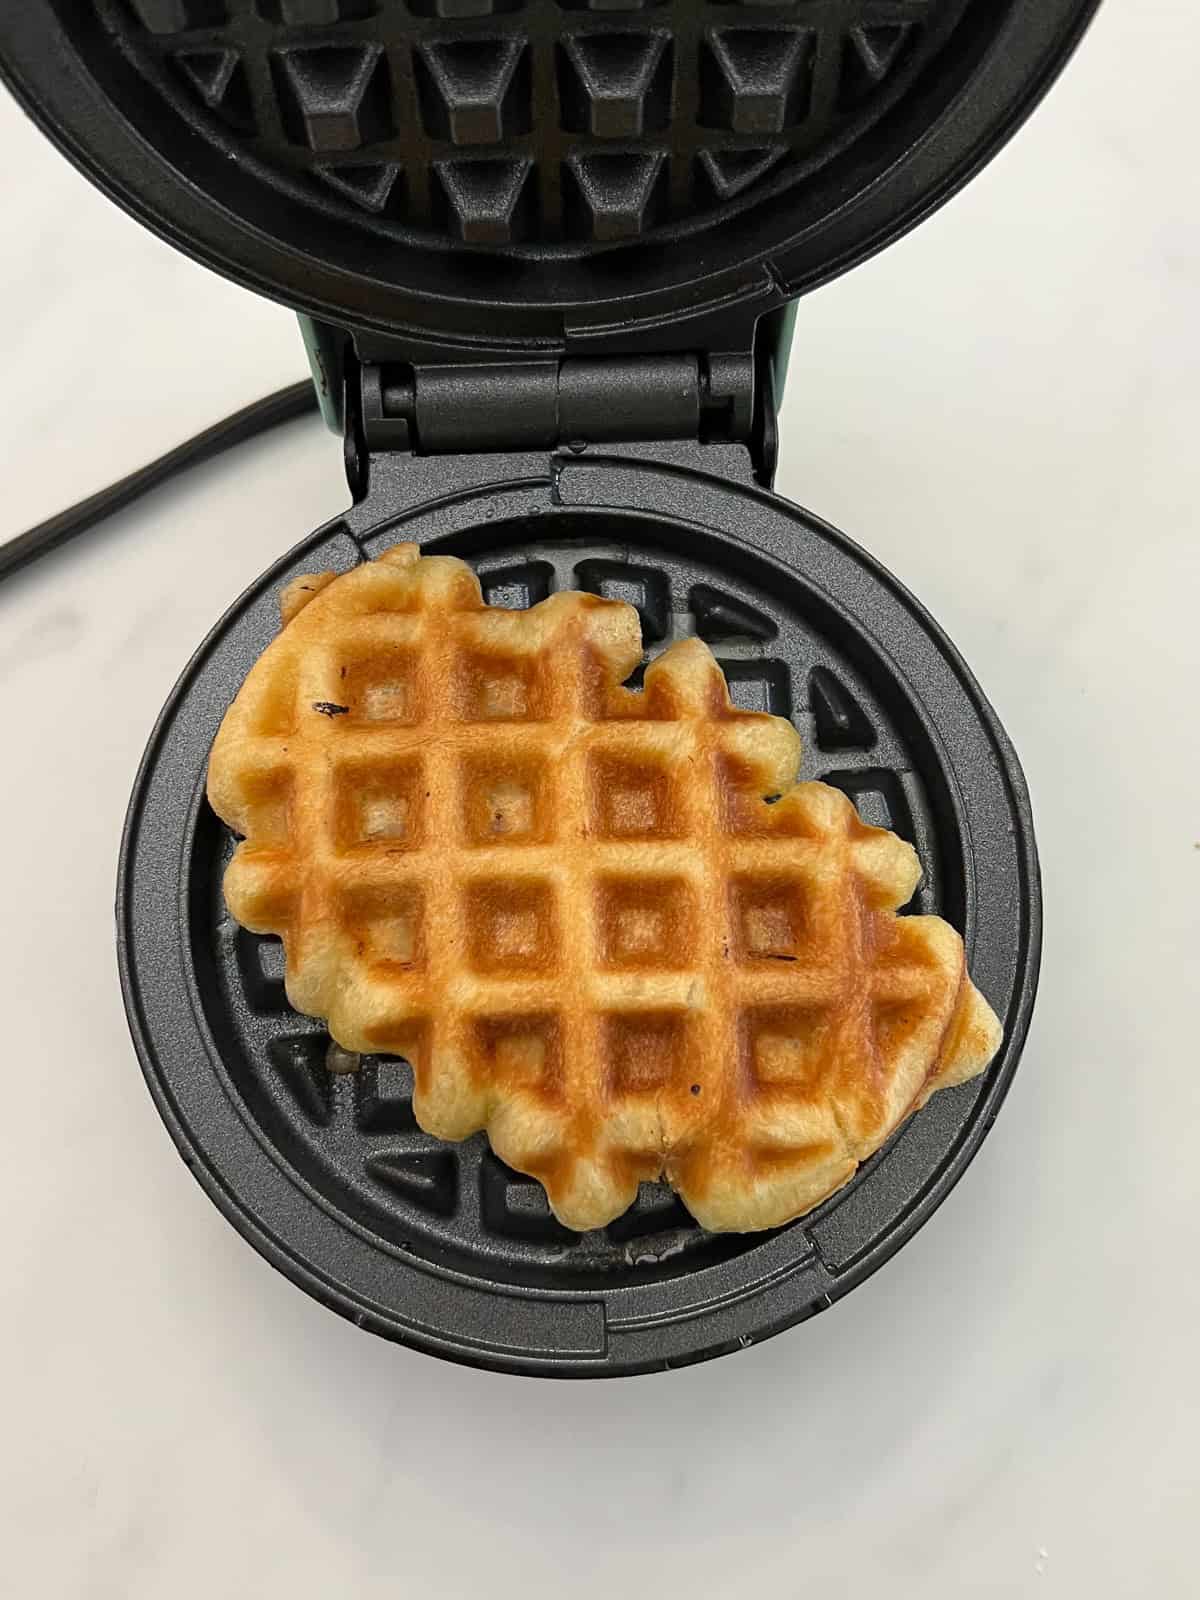 Cooked Croffle in waffle iron.